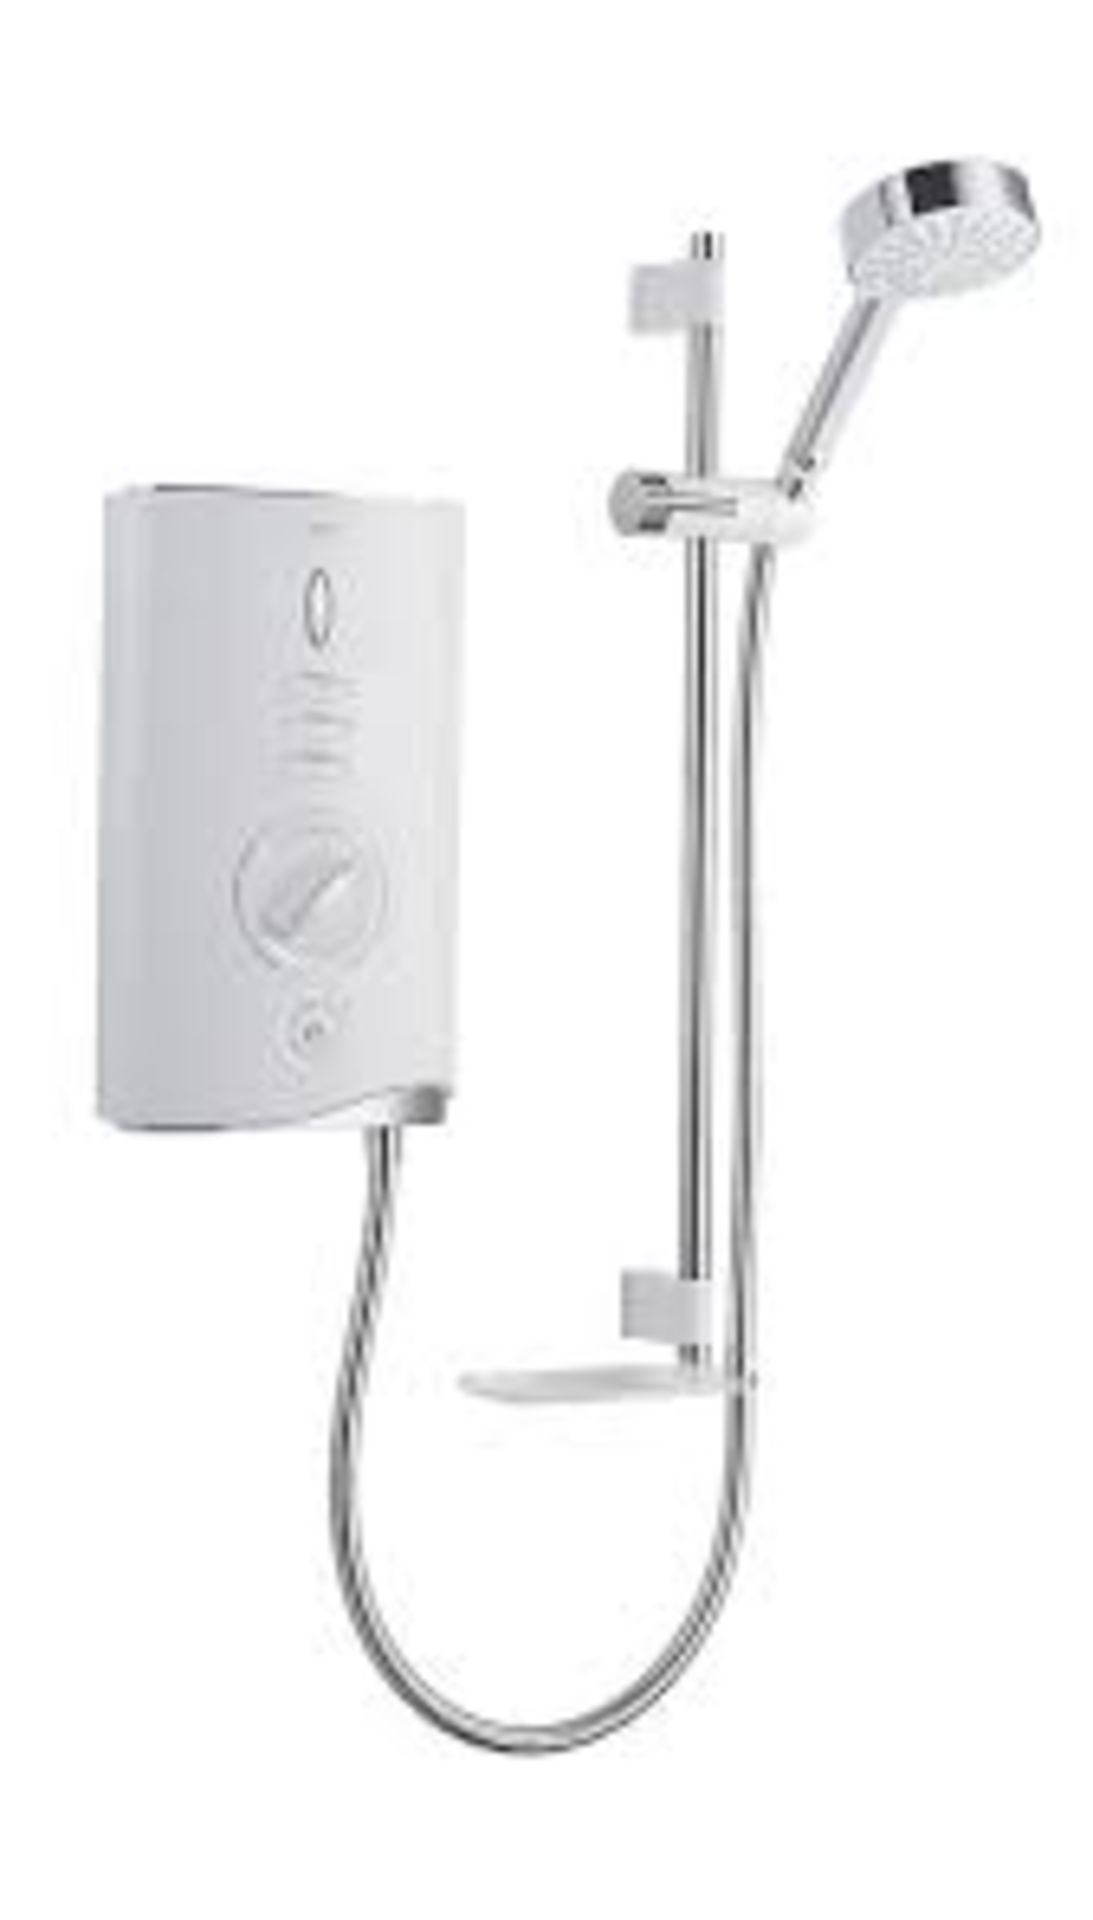 Mira Sport Max Airboost White Electric Shower, 9kW. - R10BW. Mira Sport Max Airboost white